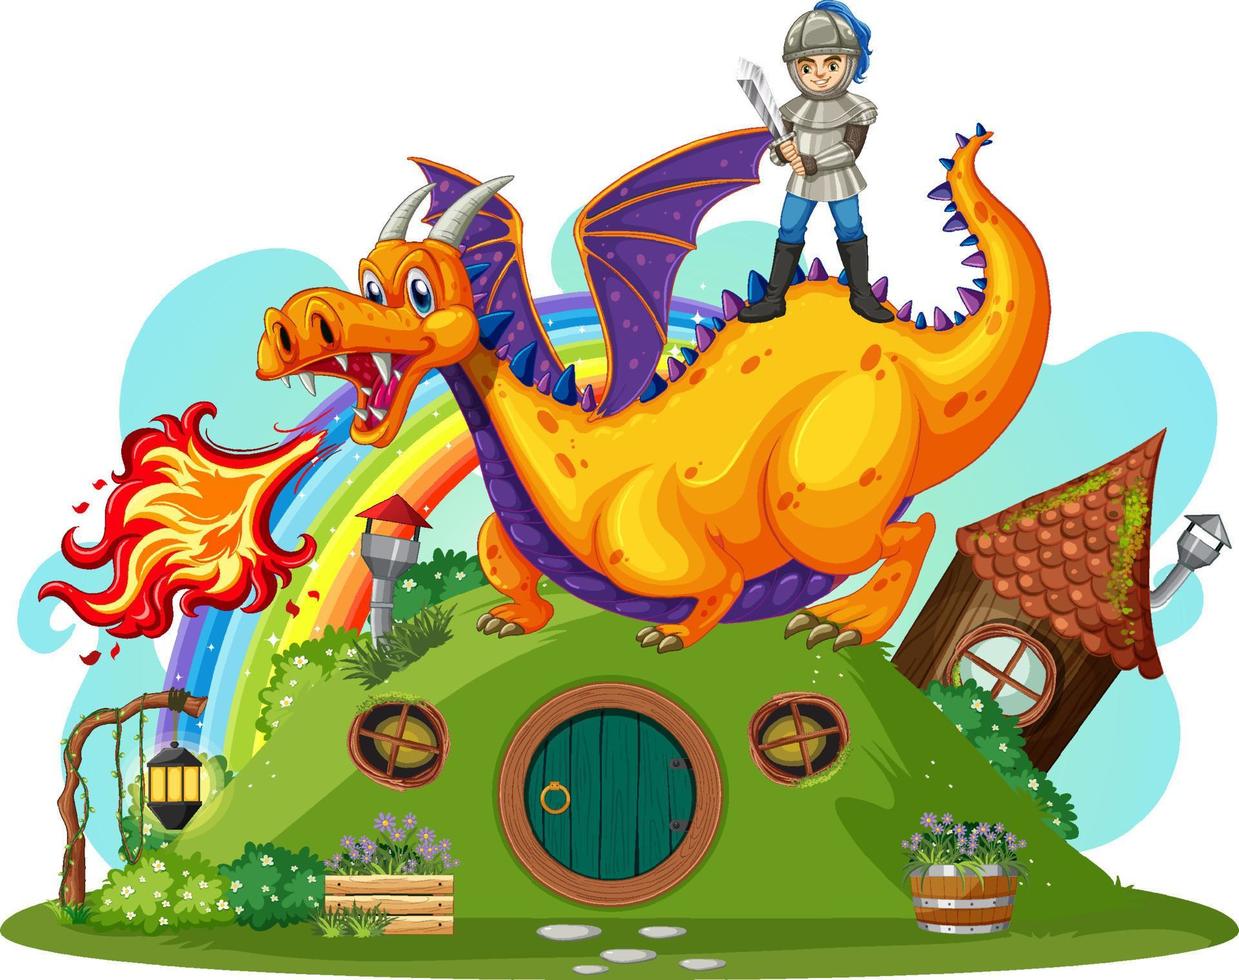 Knight at hobbit house on white background vector